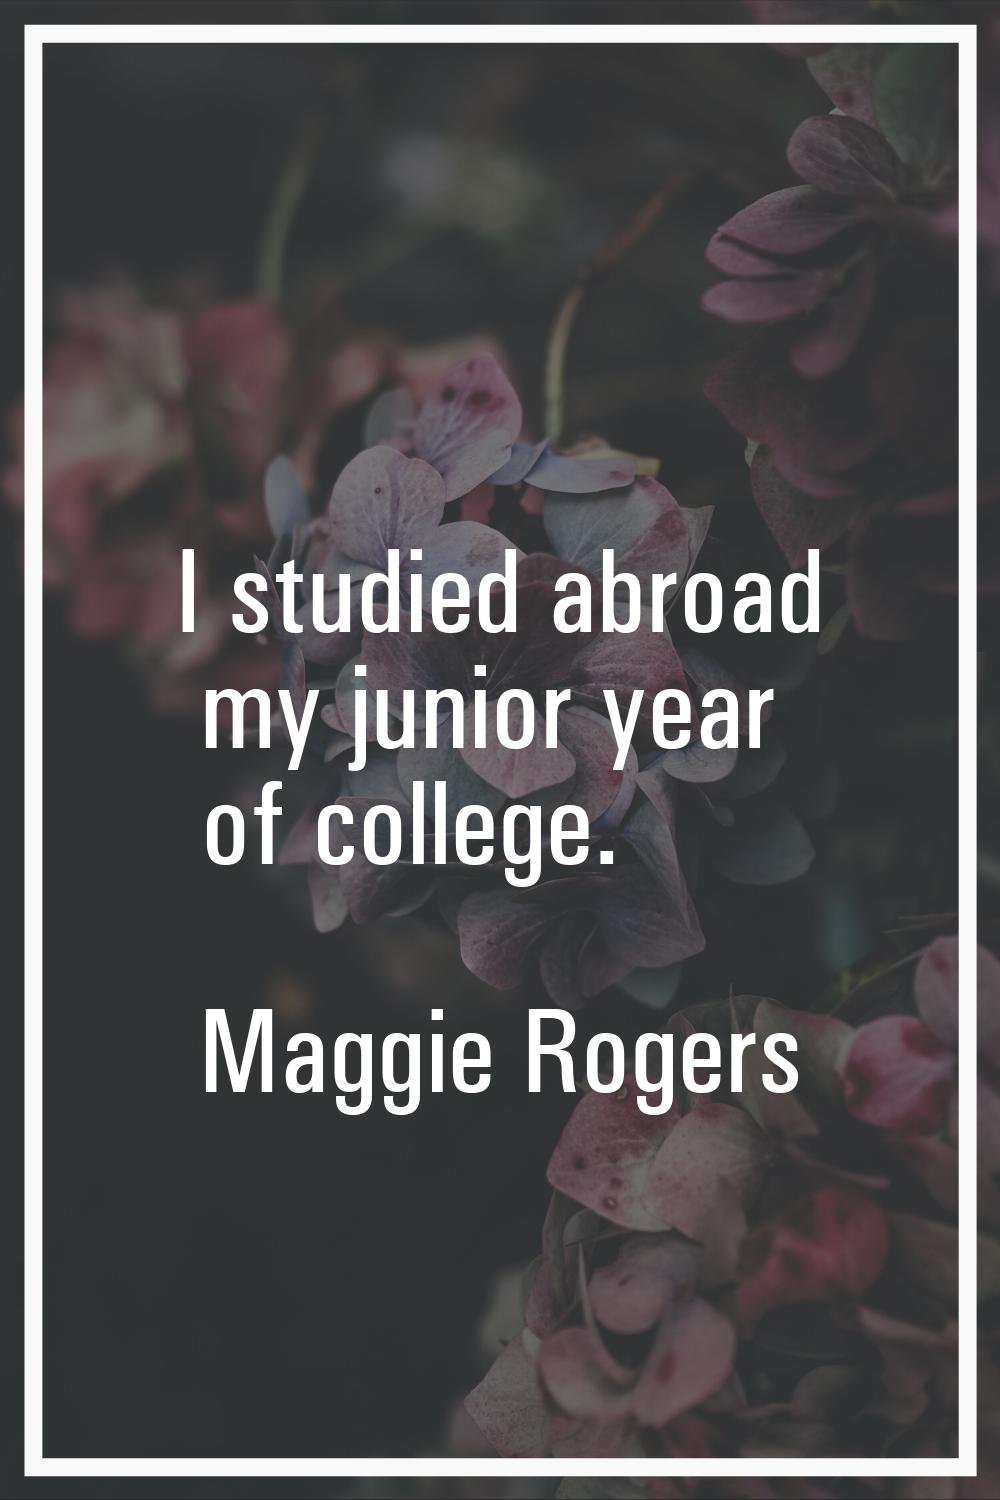 I studied abroad my junior year of college.